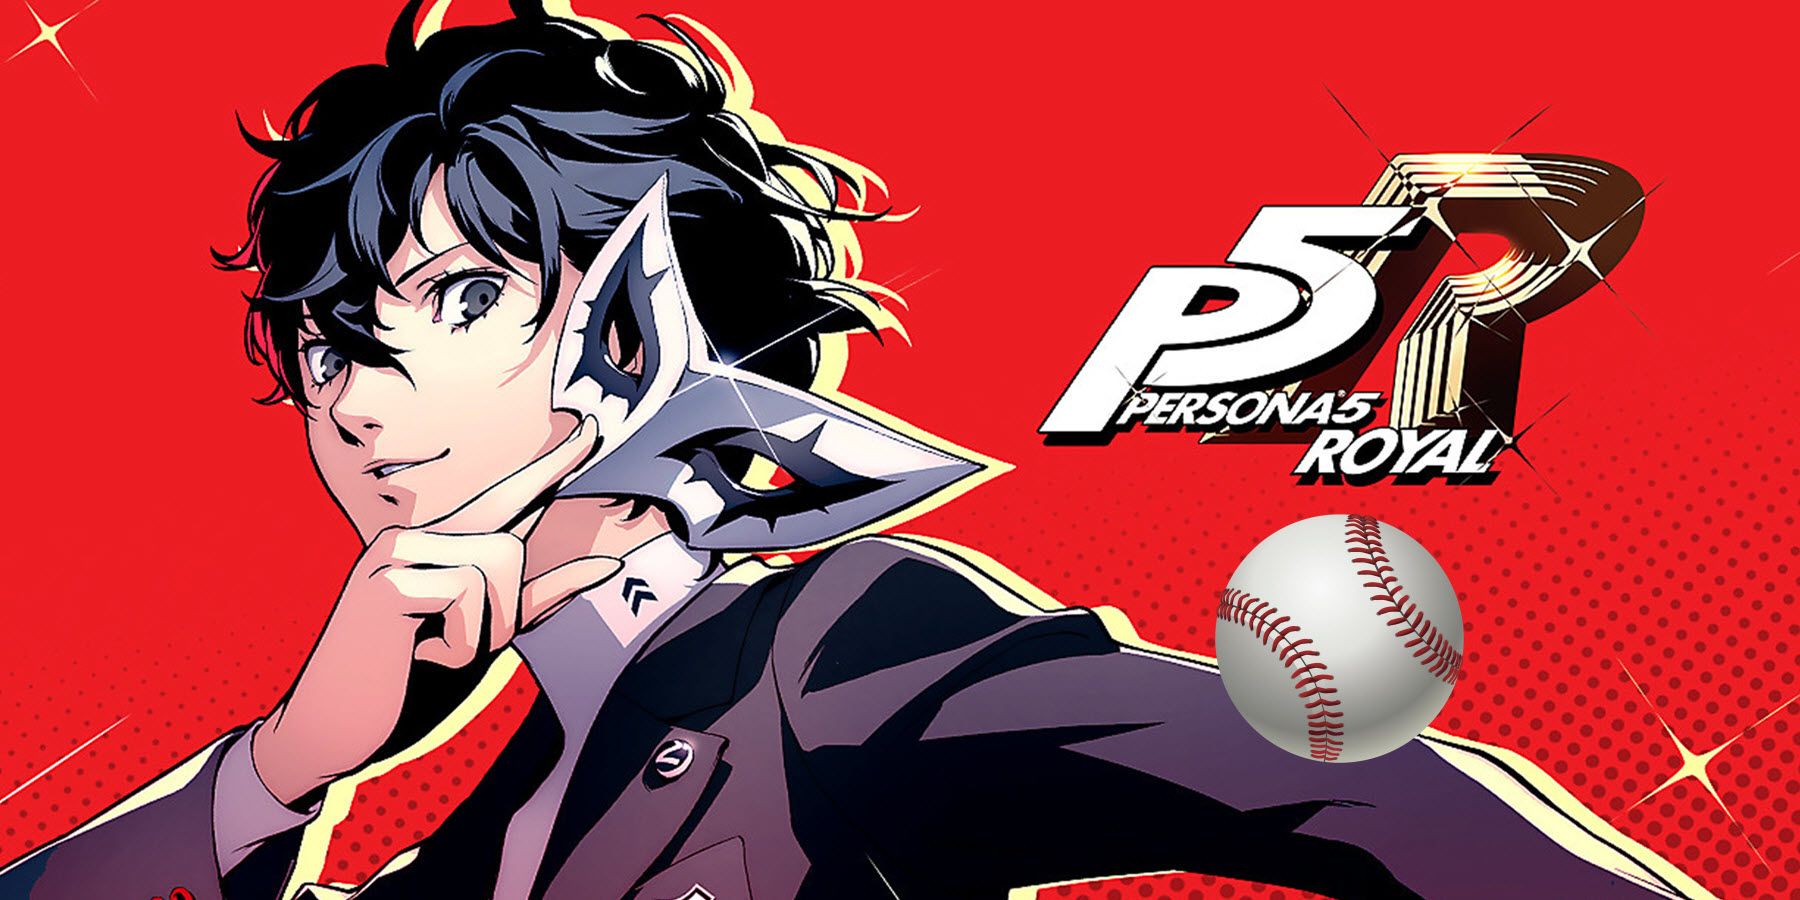 Persona 5 Royal: How to Hit a Home Run in the Batting Cages